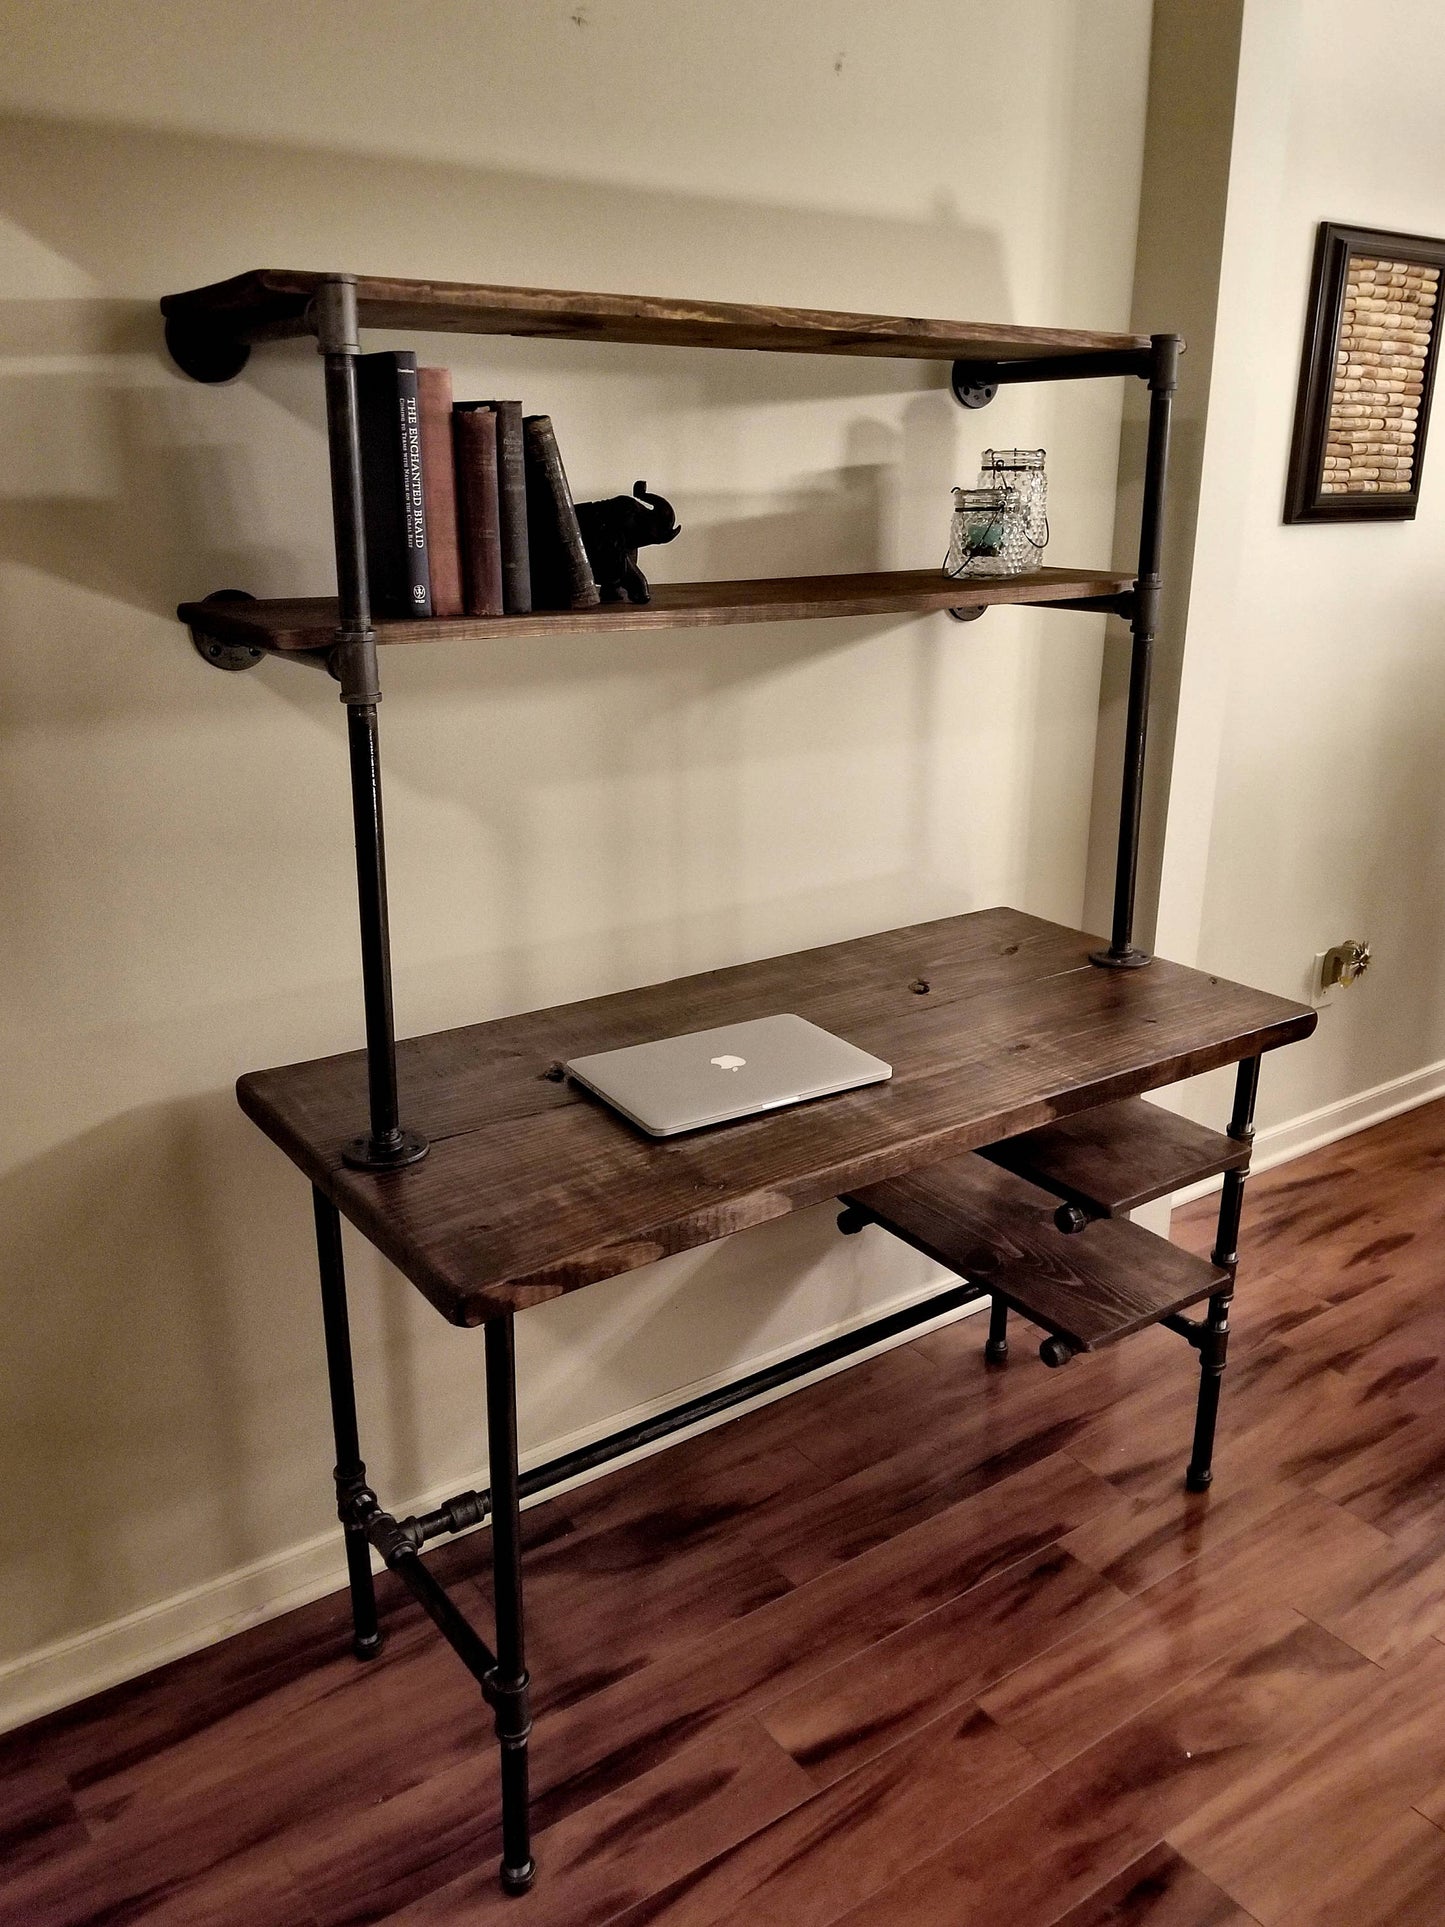 Steel and Wood Desk - Office Iron Pipe Desk with 2 Desk Shelves and 2 Wall Shelves - Multiple Shelf